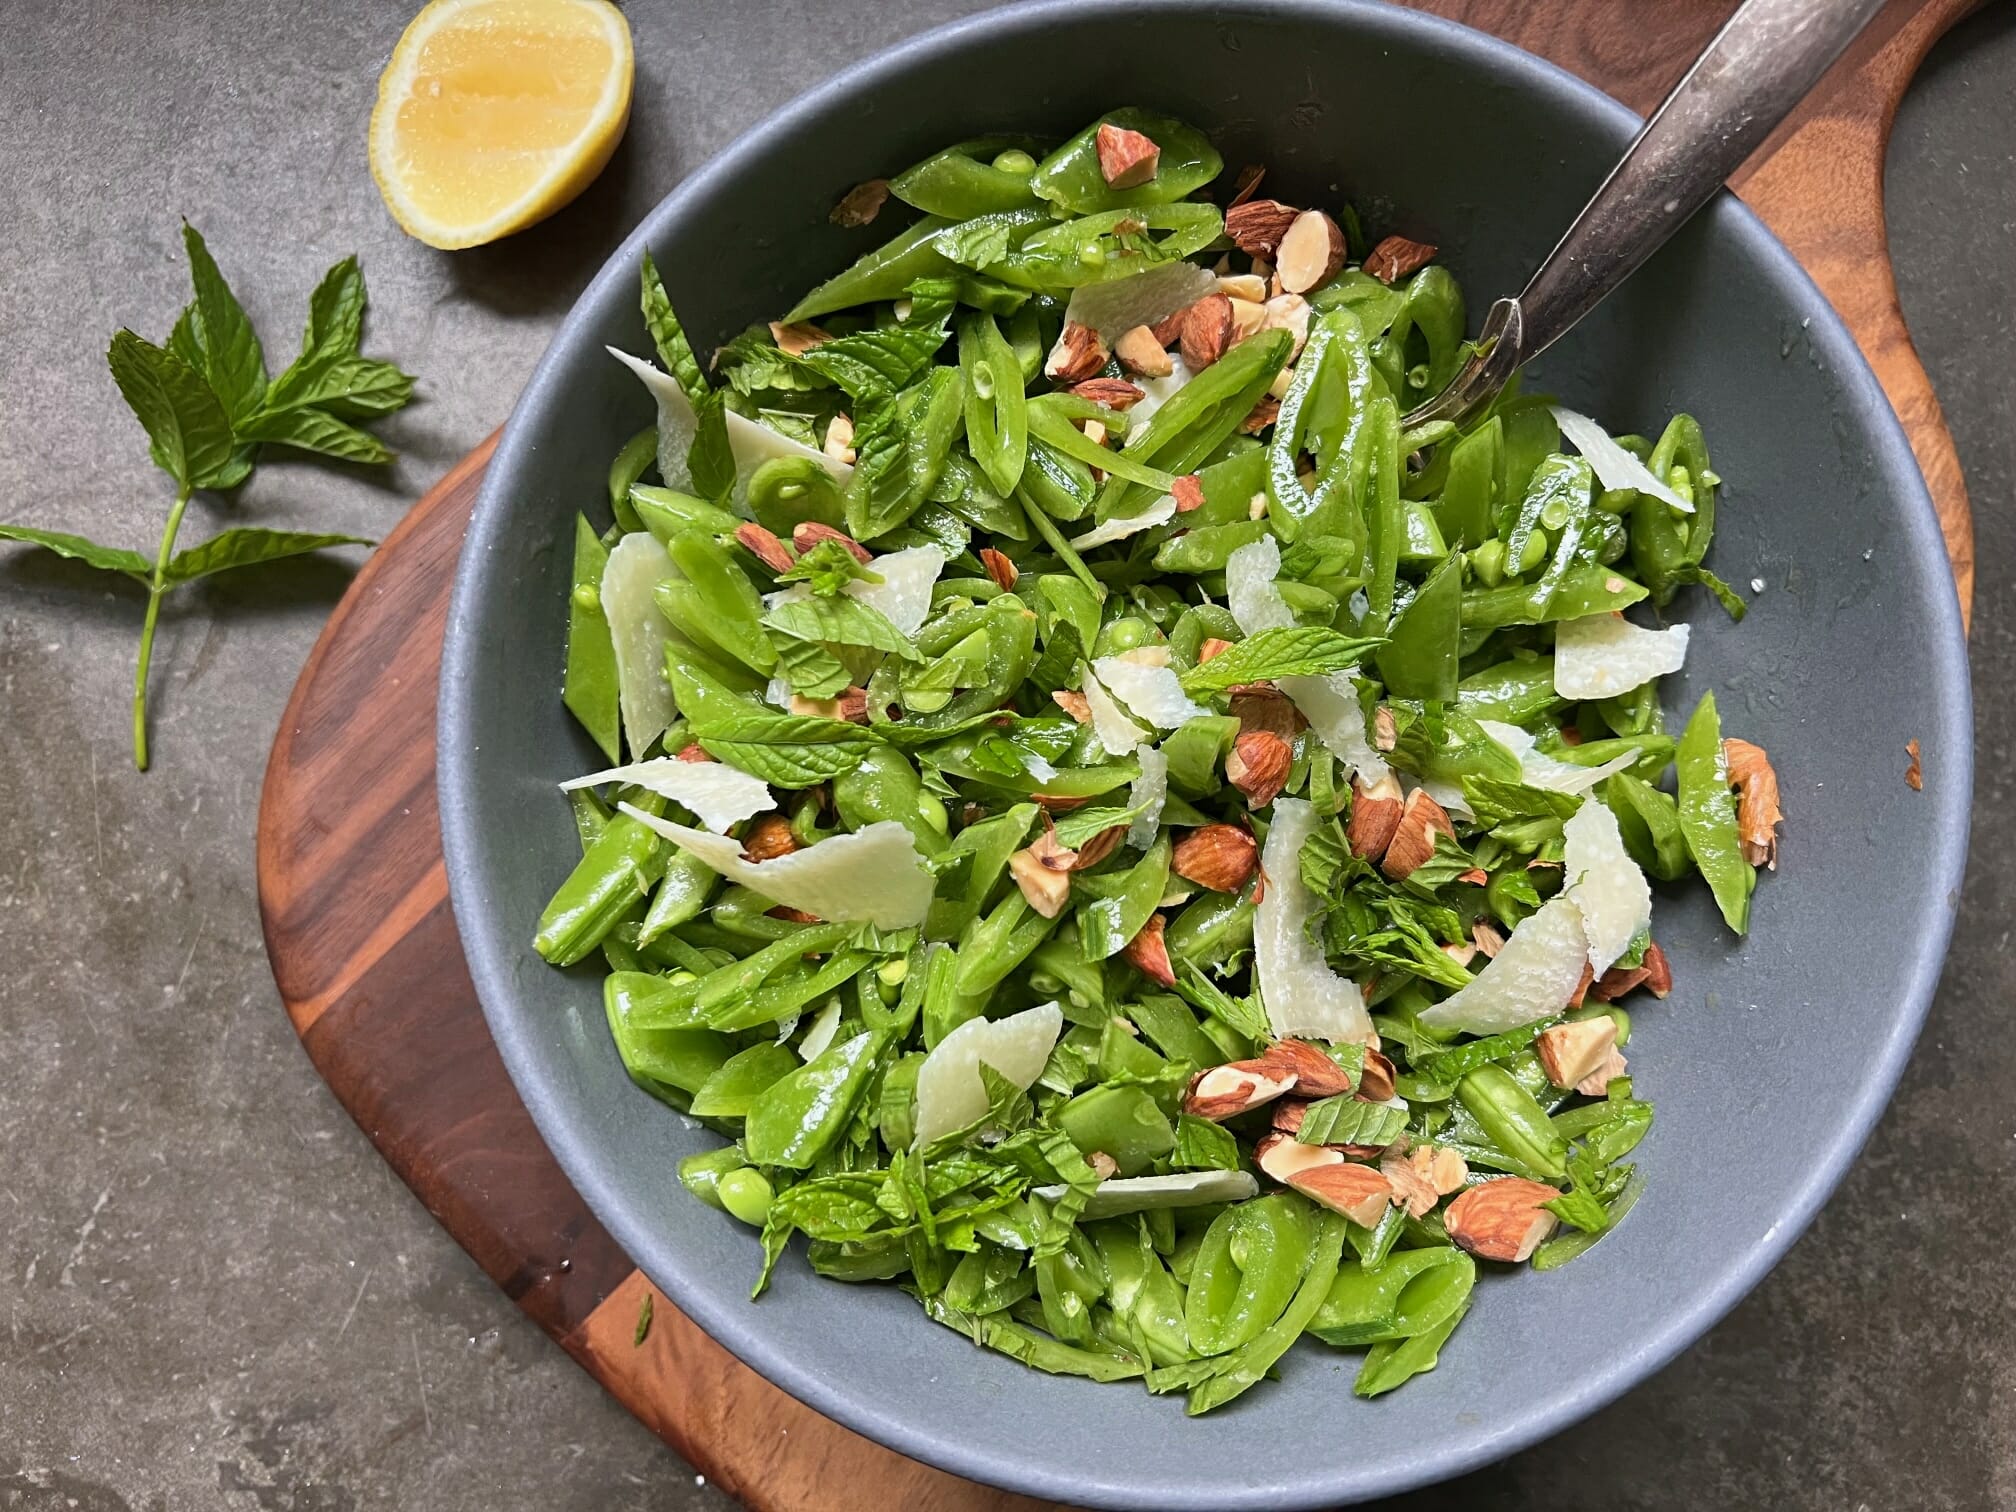 Snap Pea Salad With Walnuts and Parmesan Recipe - NYT Cooking